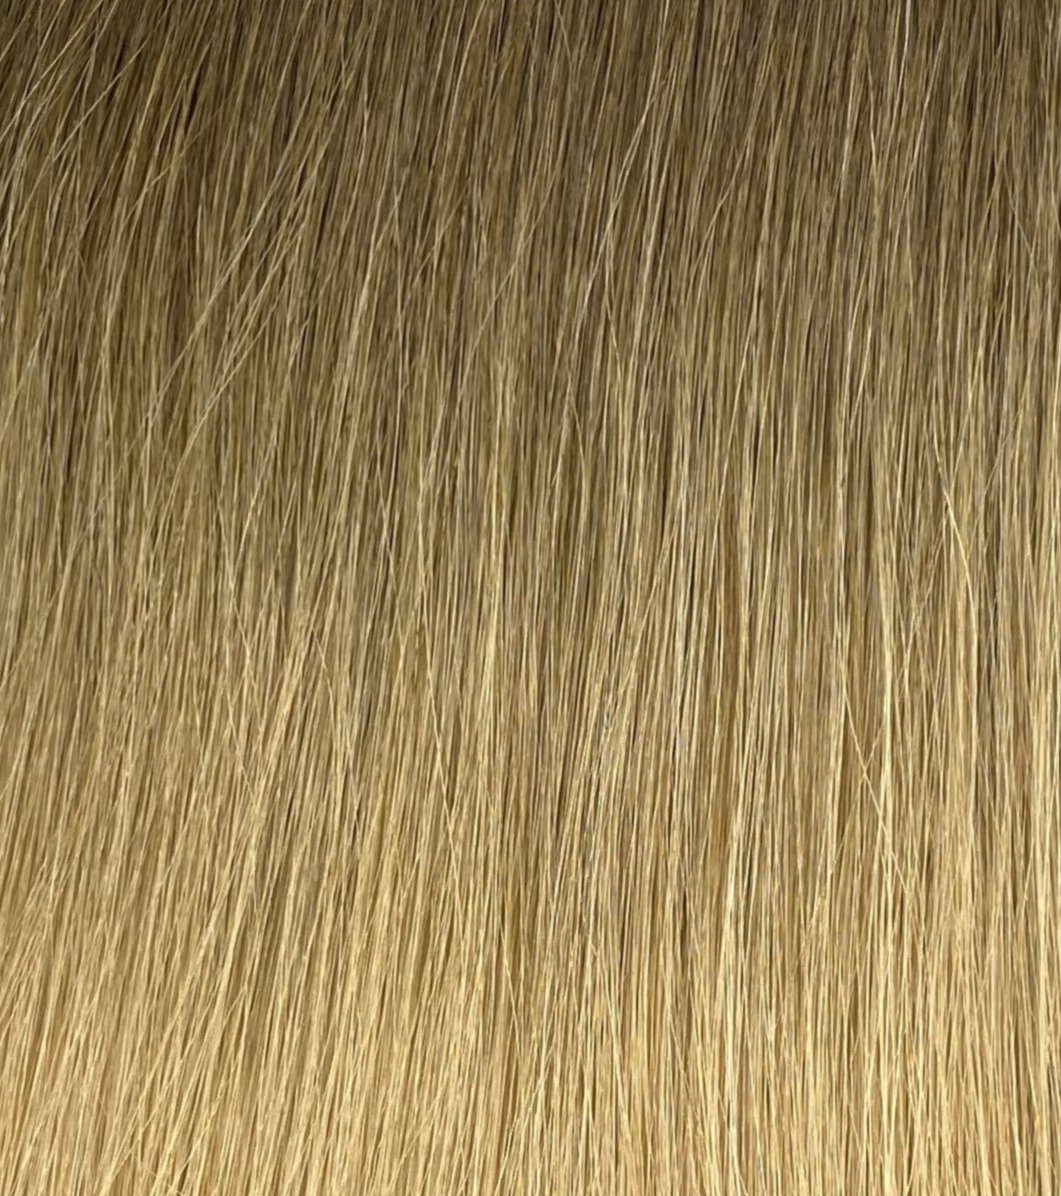 Weft hair extensions #8 & DB4 - Double - 24 inches - Dark Blonde into Dark Golden Blonde Ombre Weft DR Hair Products Co 